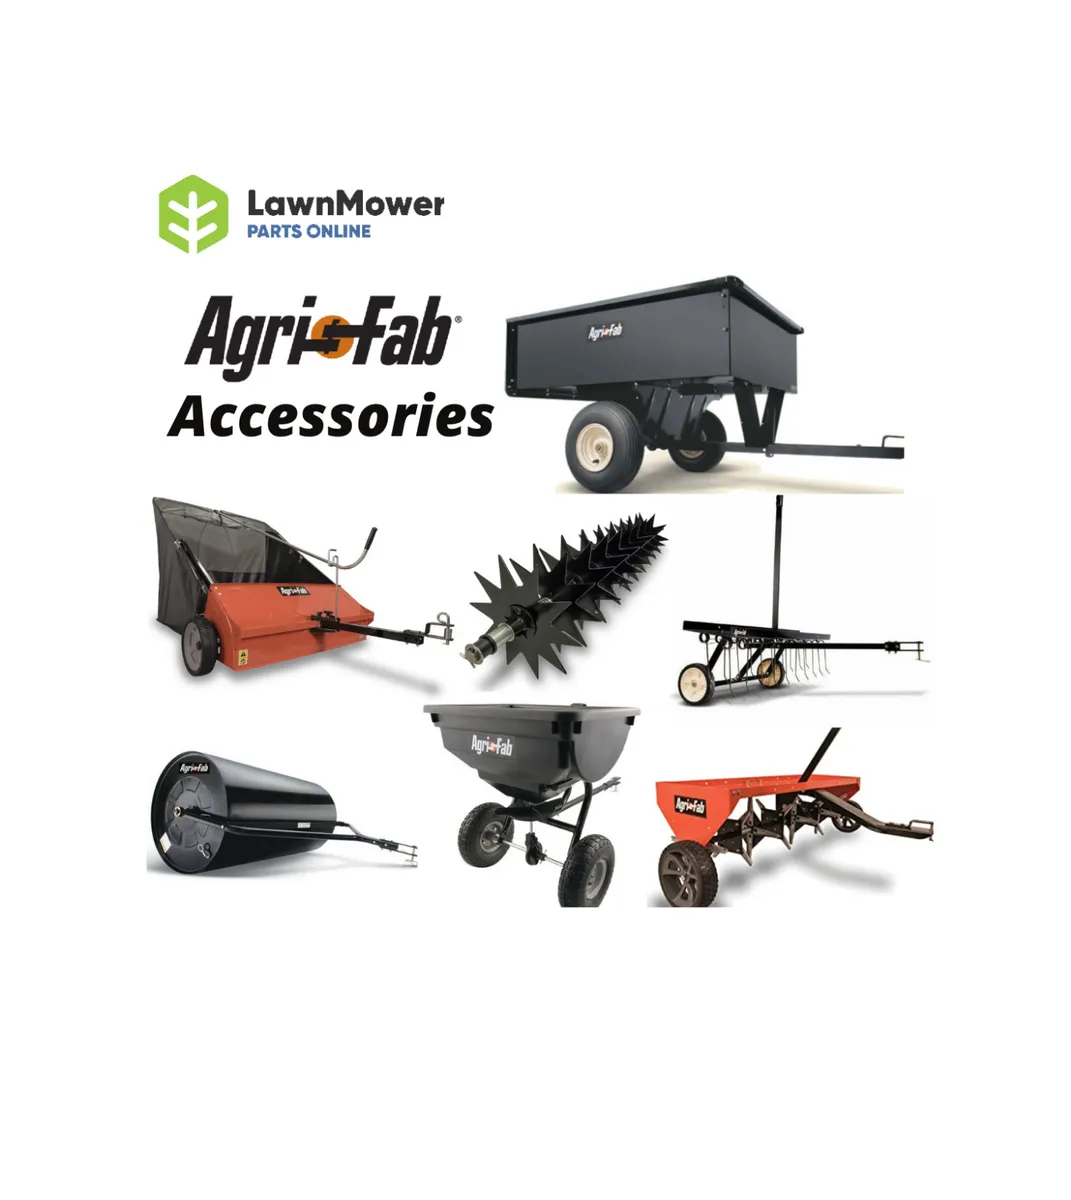 AgriFab Accessories: FREE DELIVERY - Image 1